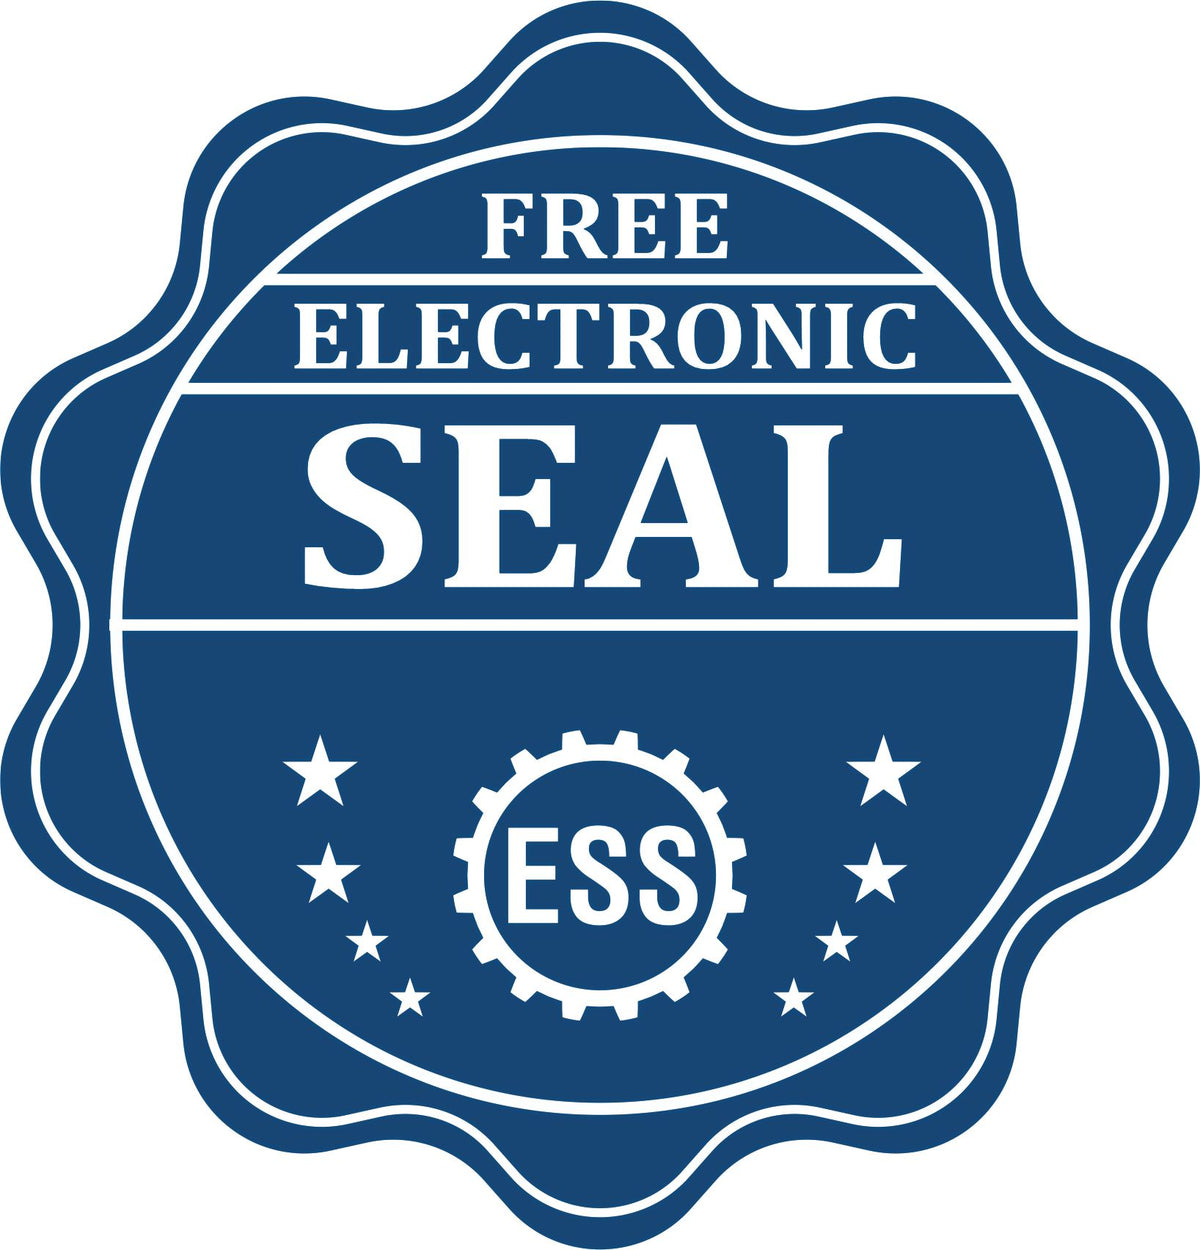 A badge showing a free electronic seal for the Kentucky Engineer Desk Seal with stars and the ESS gear on the emblem.